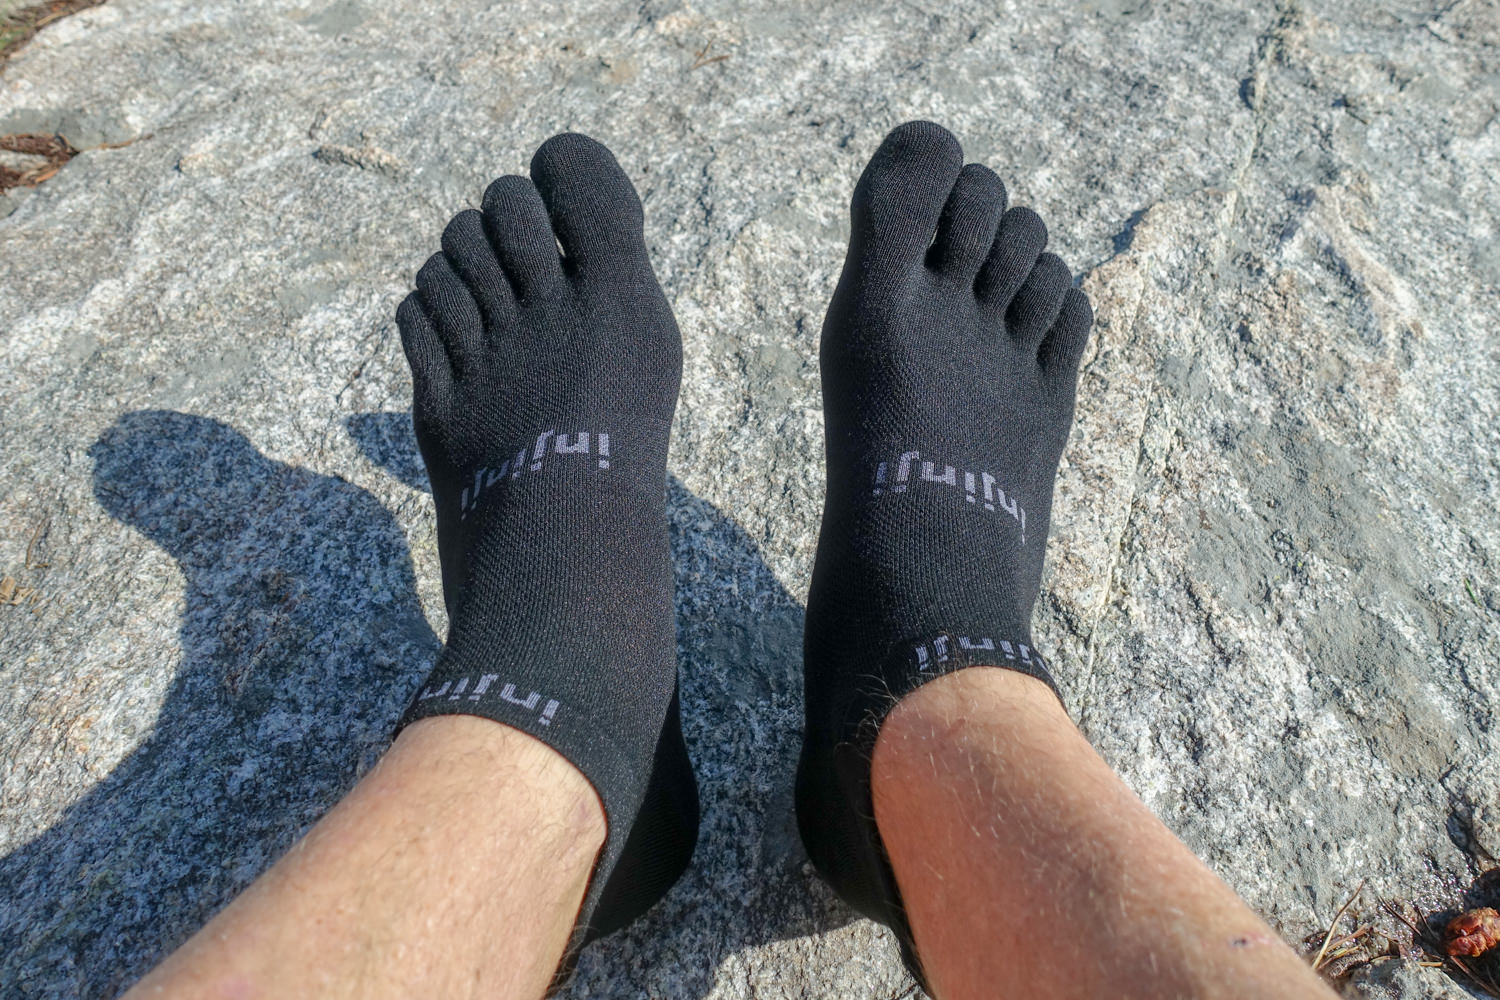 Toe socks, such as the injinji no-shows, can help prevent toe blisters.